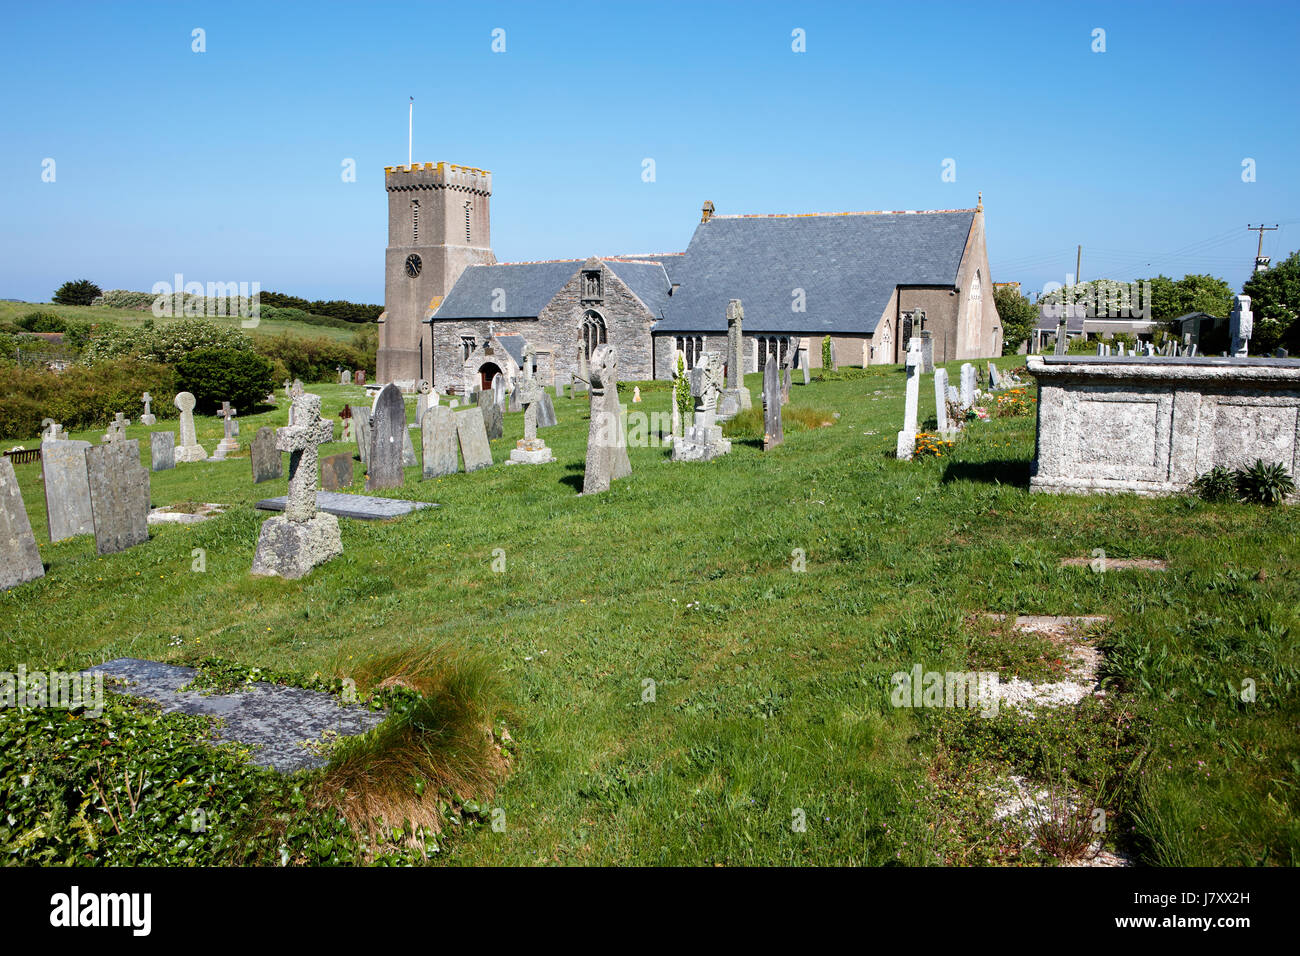 Crantock Village, Cornwall, UK. 25th May, 2017. Views of St. Carantoc's Church in Crantock. Part of a series of photos documenting villages and towns Stock Photo